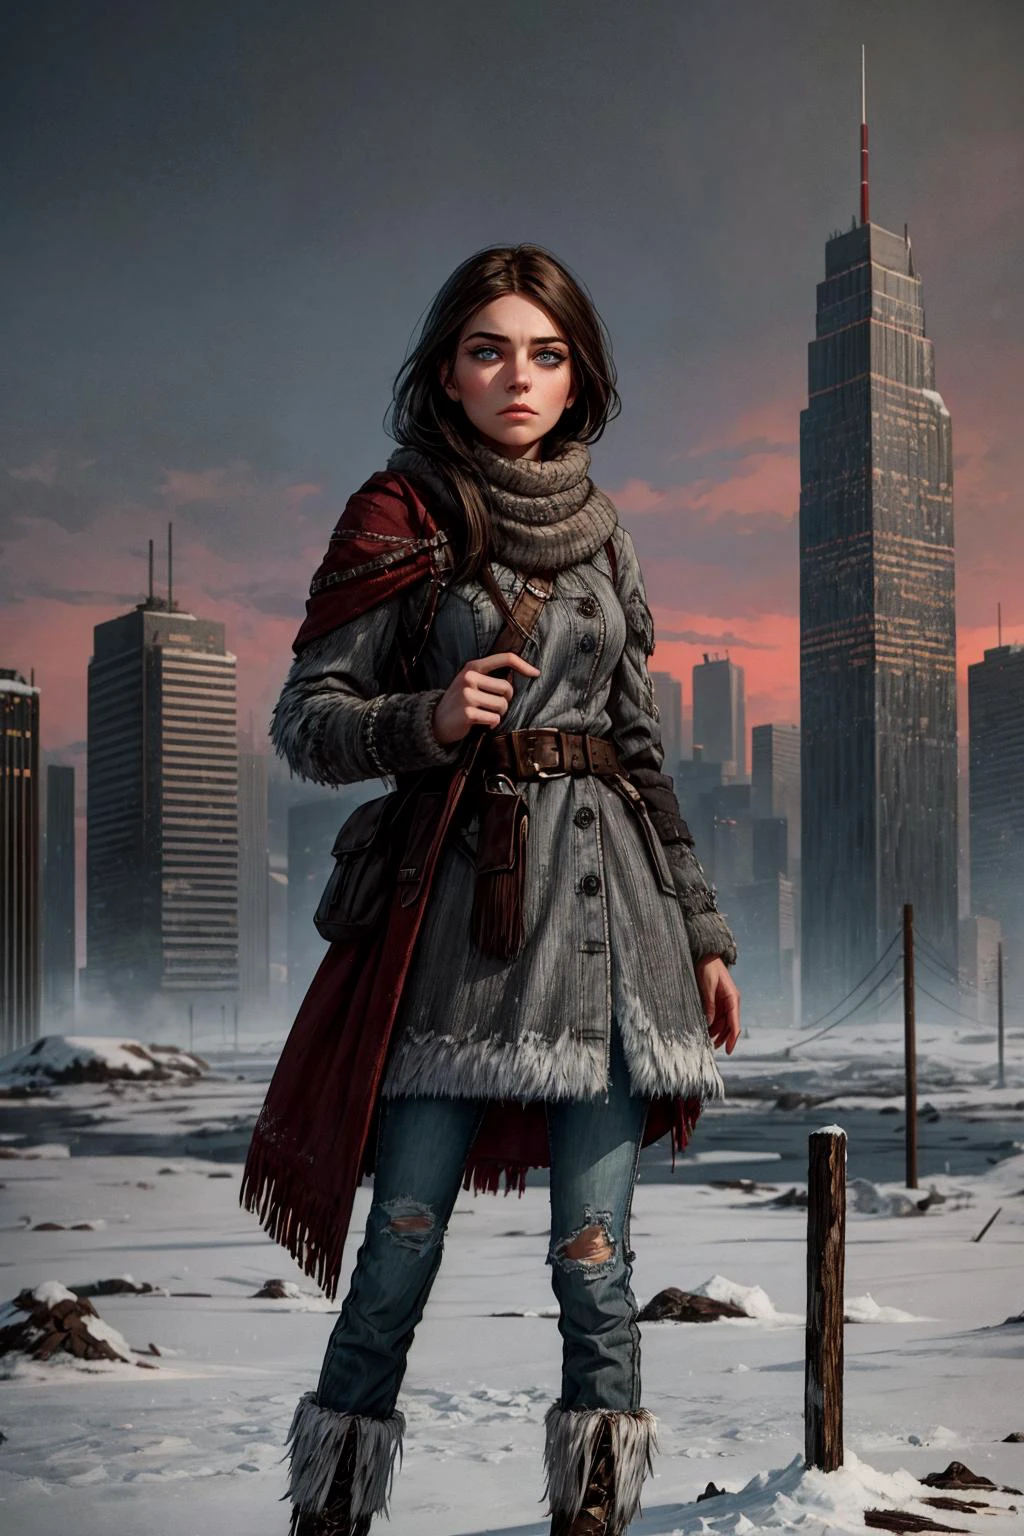 In the bleak aftermath of a nuclear apocalypse, where the world is shrouded in an eternal nuclear winter, envision a lone figure scavenger a young woman walking in [dynamic] alerted anxious pose amidst the desolation, with frozen city civilization (skyscrapers) in background with  dark hair, slim skinny toned body, [beautiful], [perfect], and [highly detailed] youthful [cute face] with upturned blue eyes. It displays a [flushed] complexion and a defined jawline [with overbite], accompanied by [full cheeks] marked with [detailed contours], [cute dimples], and adorned with [face highlighter] and [dark makeup] with eyeliner. Her [delicately proportioned features], [long defined chin], and [high cheekbones] complement her [nose, slightly upturned at the tip] and [narrow nose bridge].
She is the embodiment of resilience in a world frozen by the nuclear ice age. Picture her bundled up in tattered, layered clothing, each piece a testament to survival. Her breath mingles with the frosty air as she gazes across the frozen, barren landscape.
The sky above is an eerie canvas of ashen gray, devoid of the vibrant hues of the past. The once-mighty skyscrapers now stand as icy monoliths, their shattered windows reflecting the muted sunlight.
The ground beneath her feet is a patchwork of frozen wasteland, where the remnants of civilization lie buried beneath layers of snow and ice. She clutches a makeshift weapon, a symbol of her determination to survive in this harsh new world.
As she stands there, a solitary figure in this frozen apocalypse, there's a glimmer of hope in her eyesâa belief that somewhere, amidst the icy desolation, there is still a chance for life to bloom once more. This is a vision of a post-nuclear ice age 